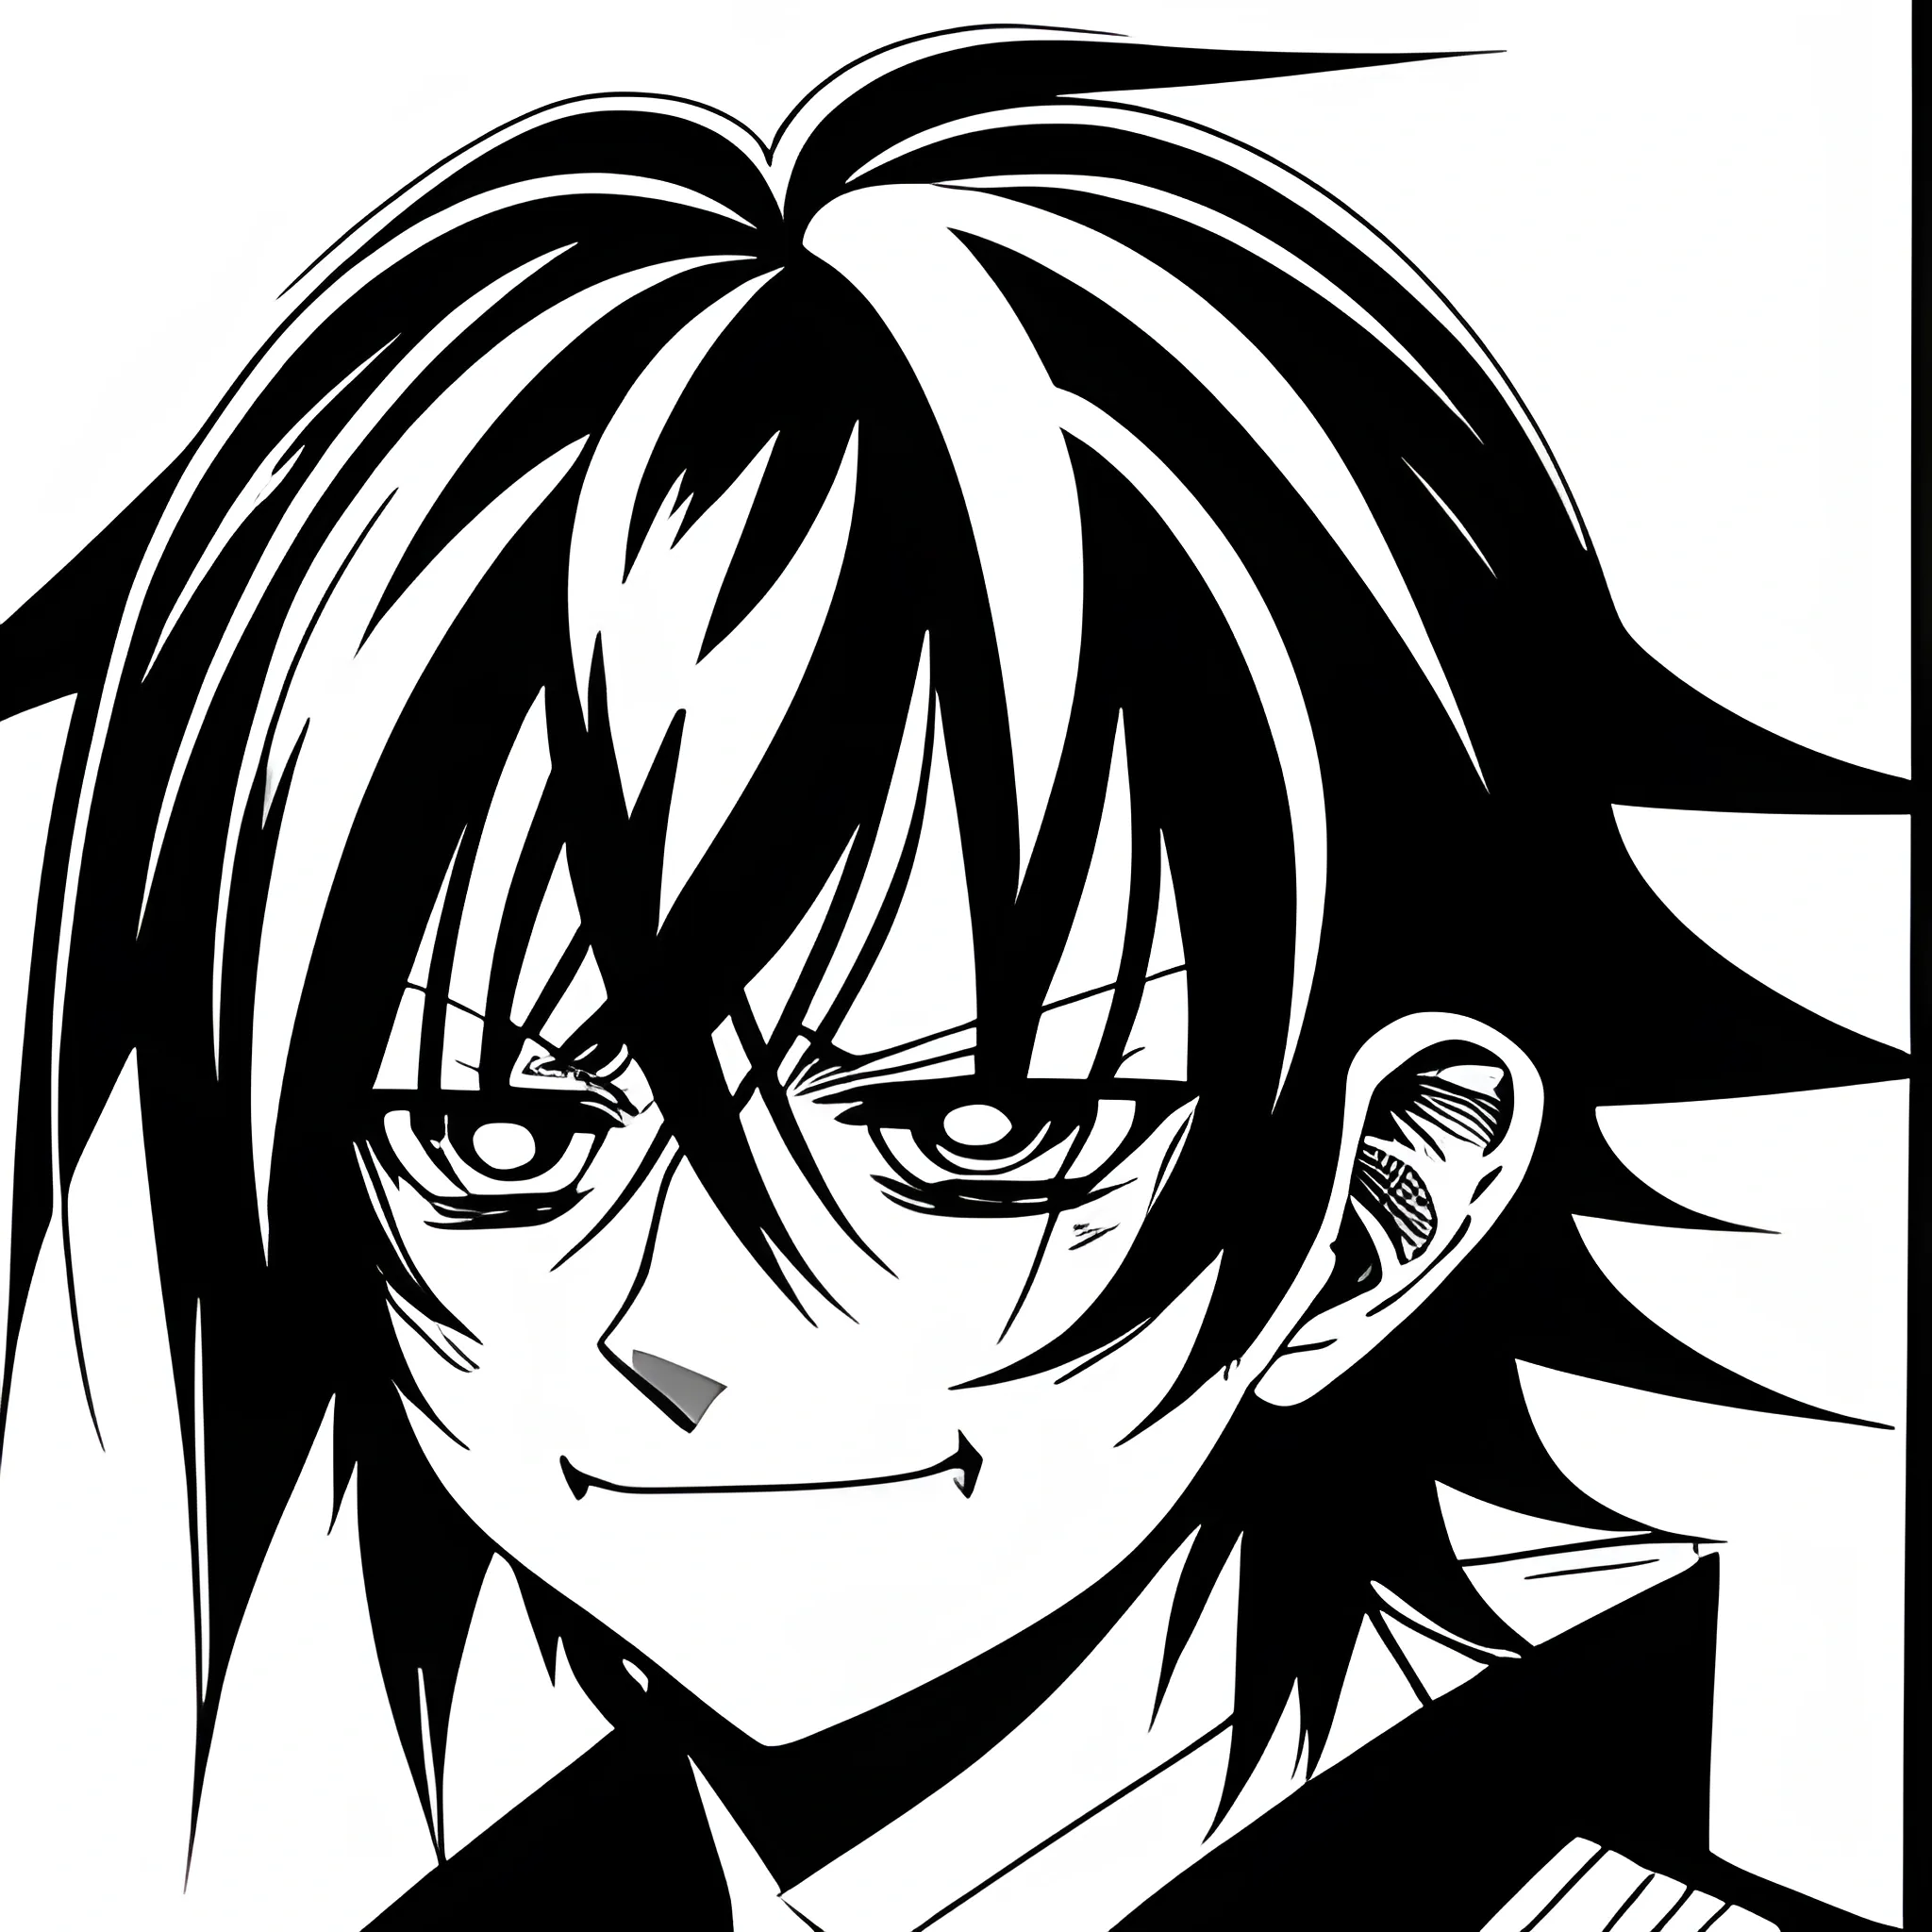 L lawliet sinister smile side view, manga panel portrait style ...